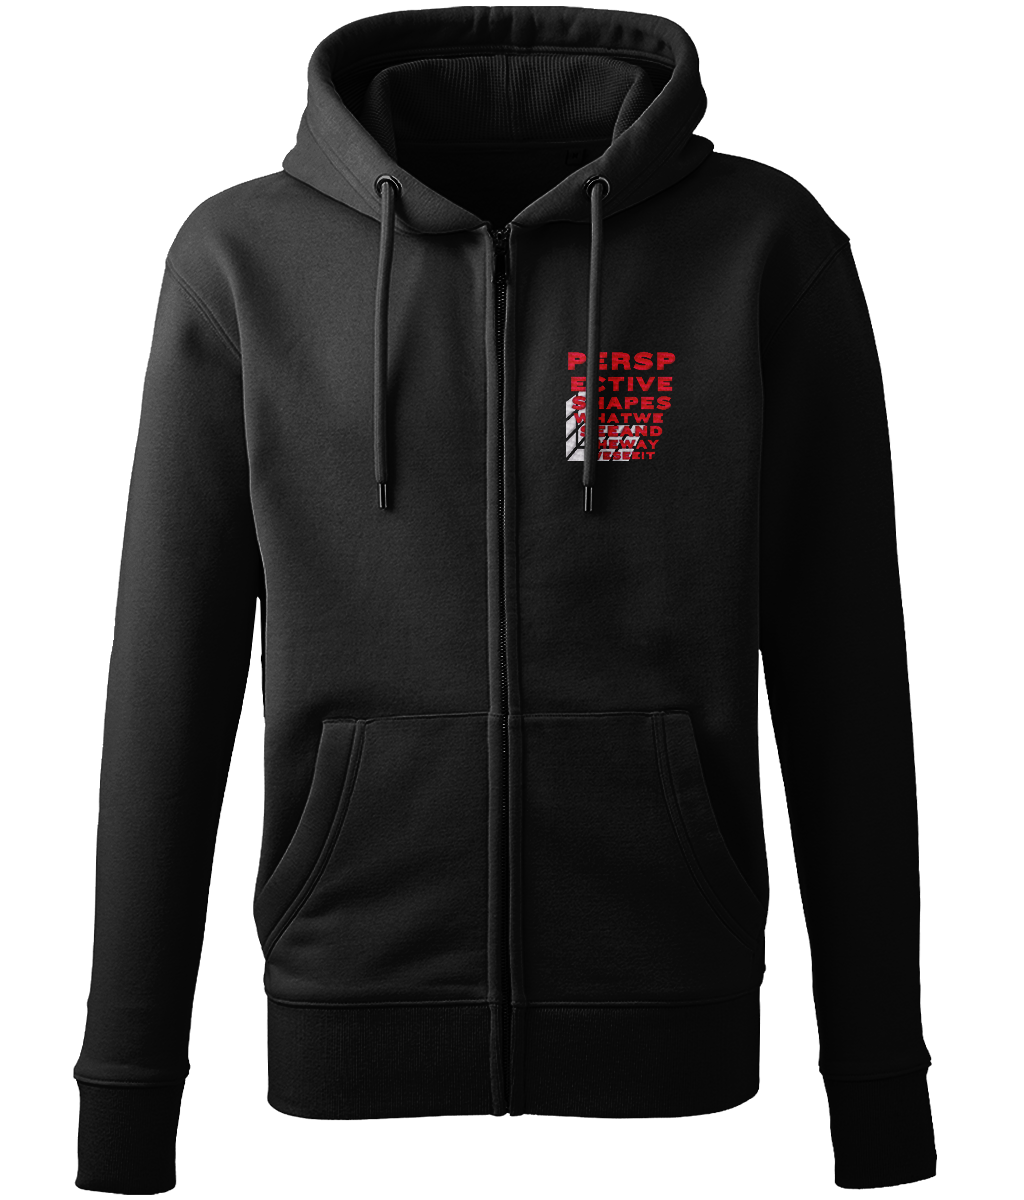 Eco-Friendly Unisex Full-Zip Hoodie - Perspective (Embroidered)